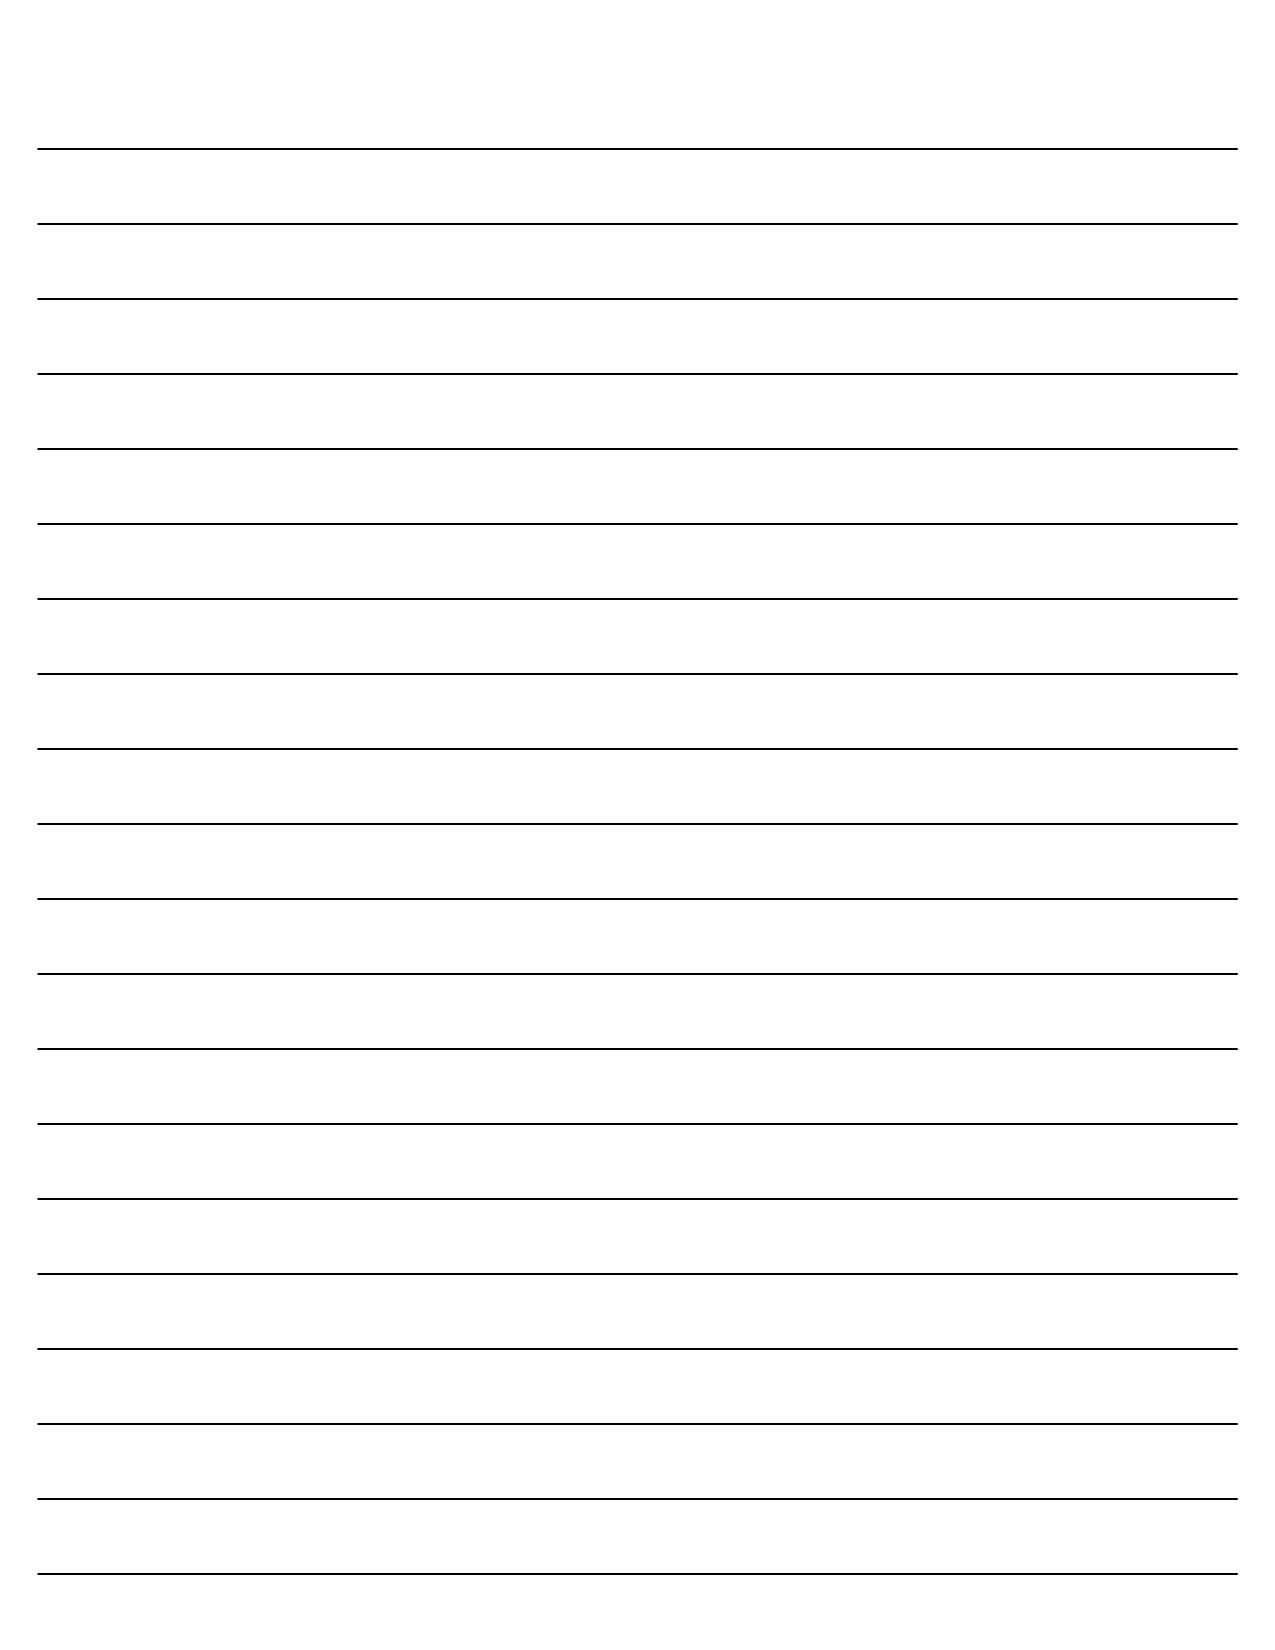 lined-handwriting-paper-printable